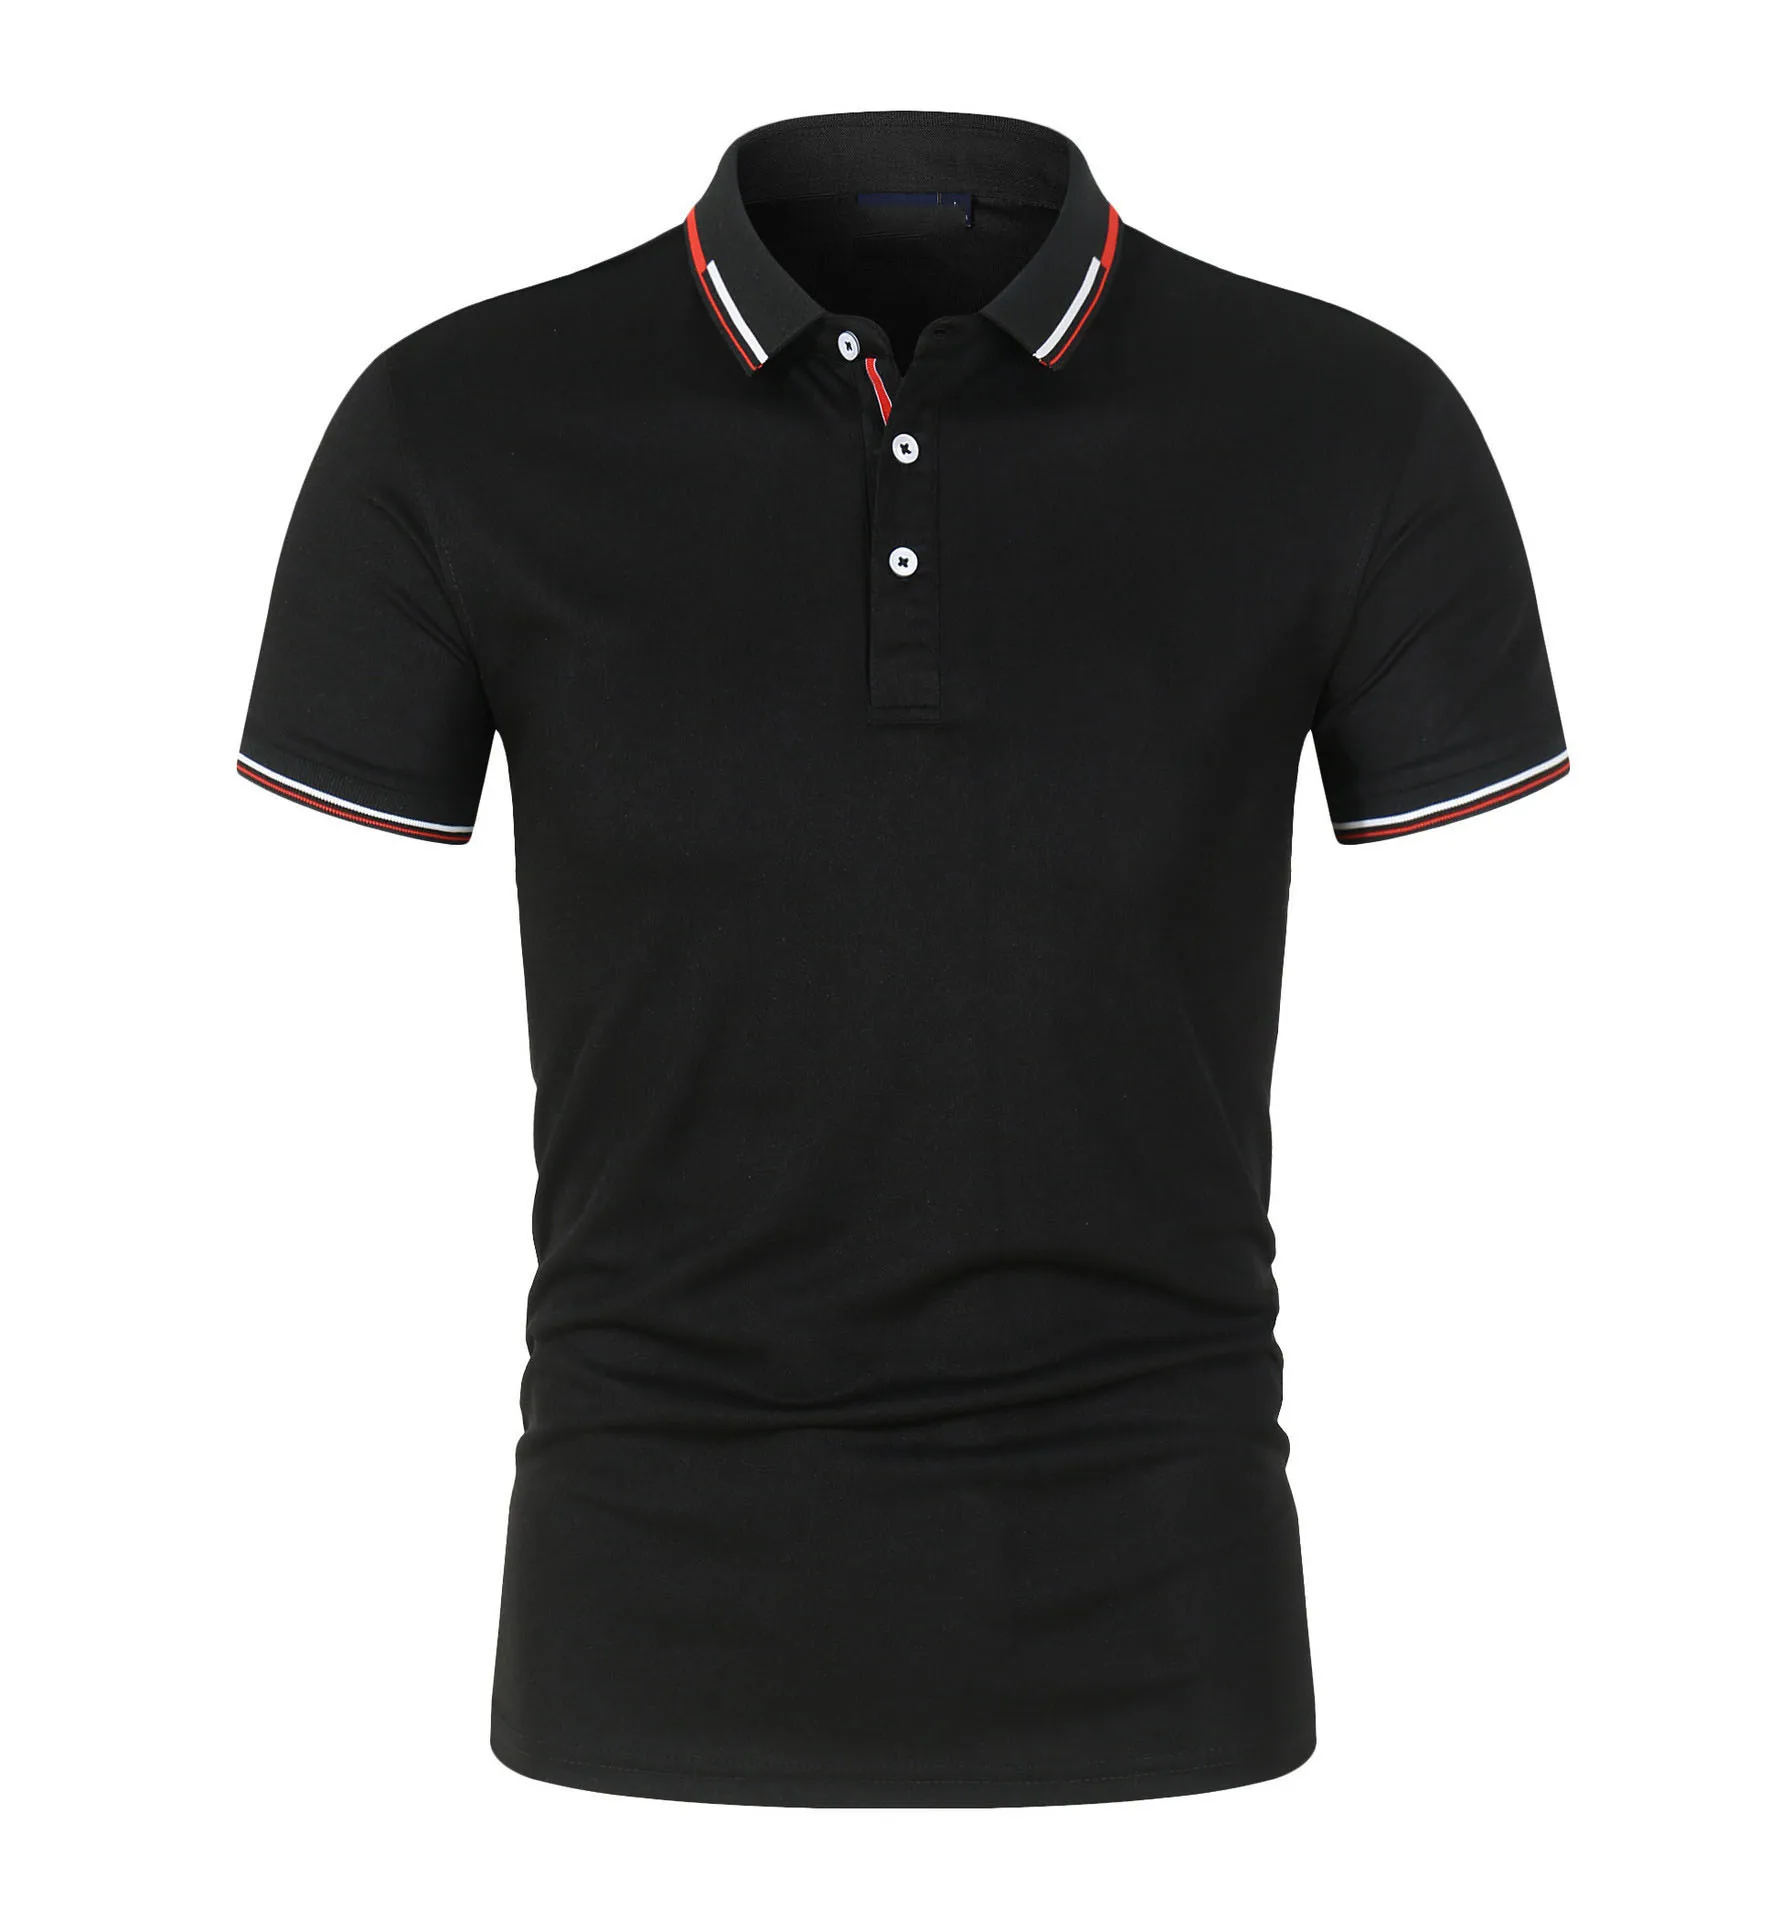 

Customized branded cotton spandex pique men's polo t shirt men's polo shirt supplier from China, All colors from pantone